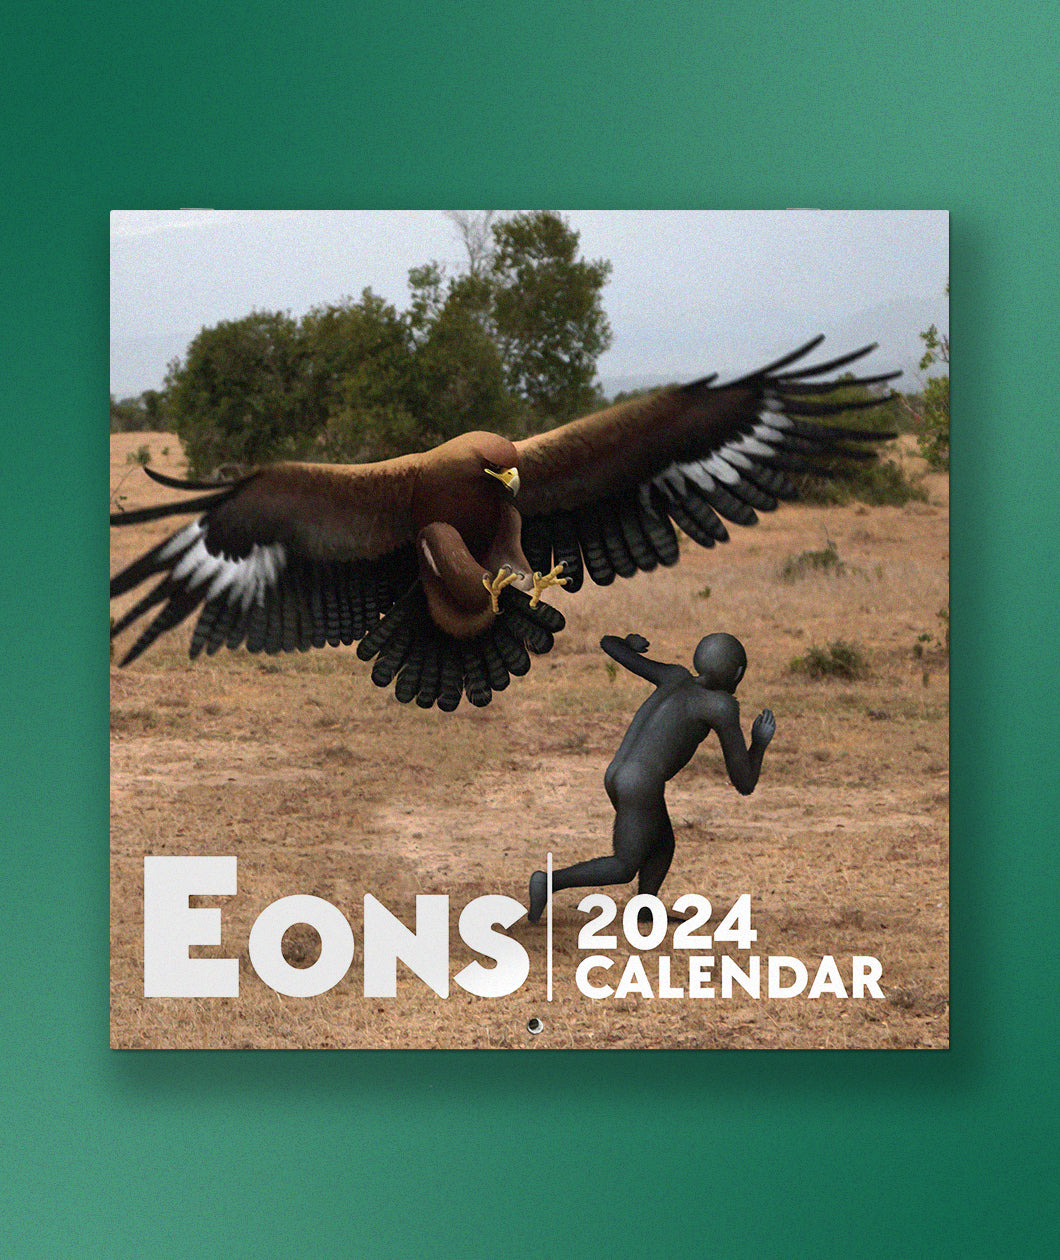 The cover of the Eons 2024 Calendar in front of a green background. The cover is a rendering of a large hawk attacking a person.  